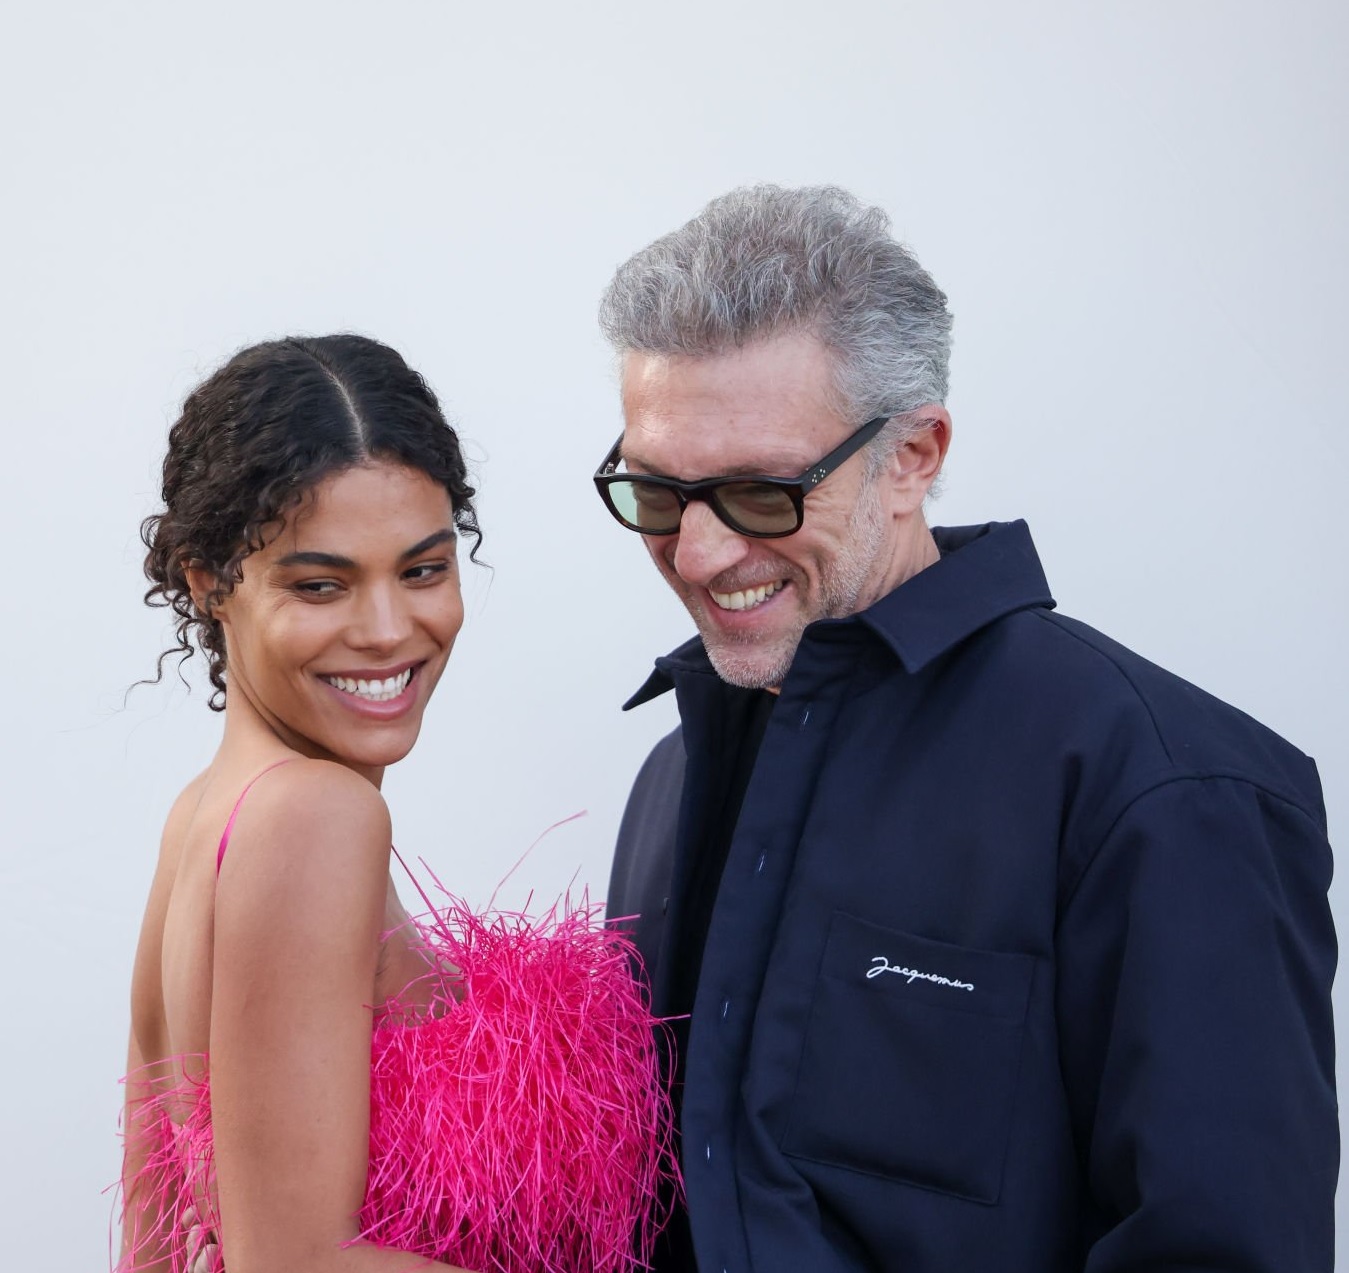  Vincent Cassel and Tina Kunakey attended the "Le Raphia" Jacquemus show in December 2022